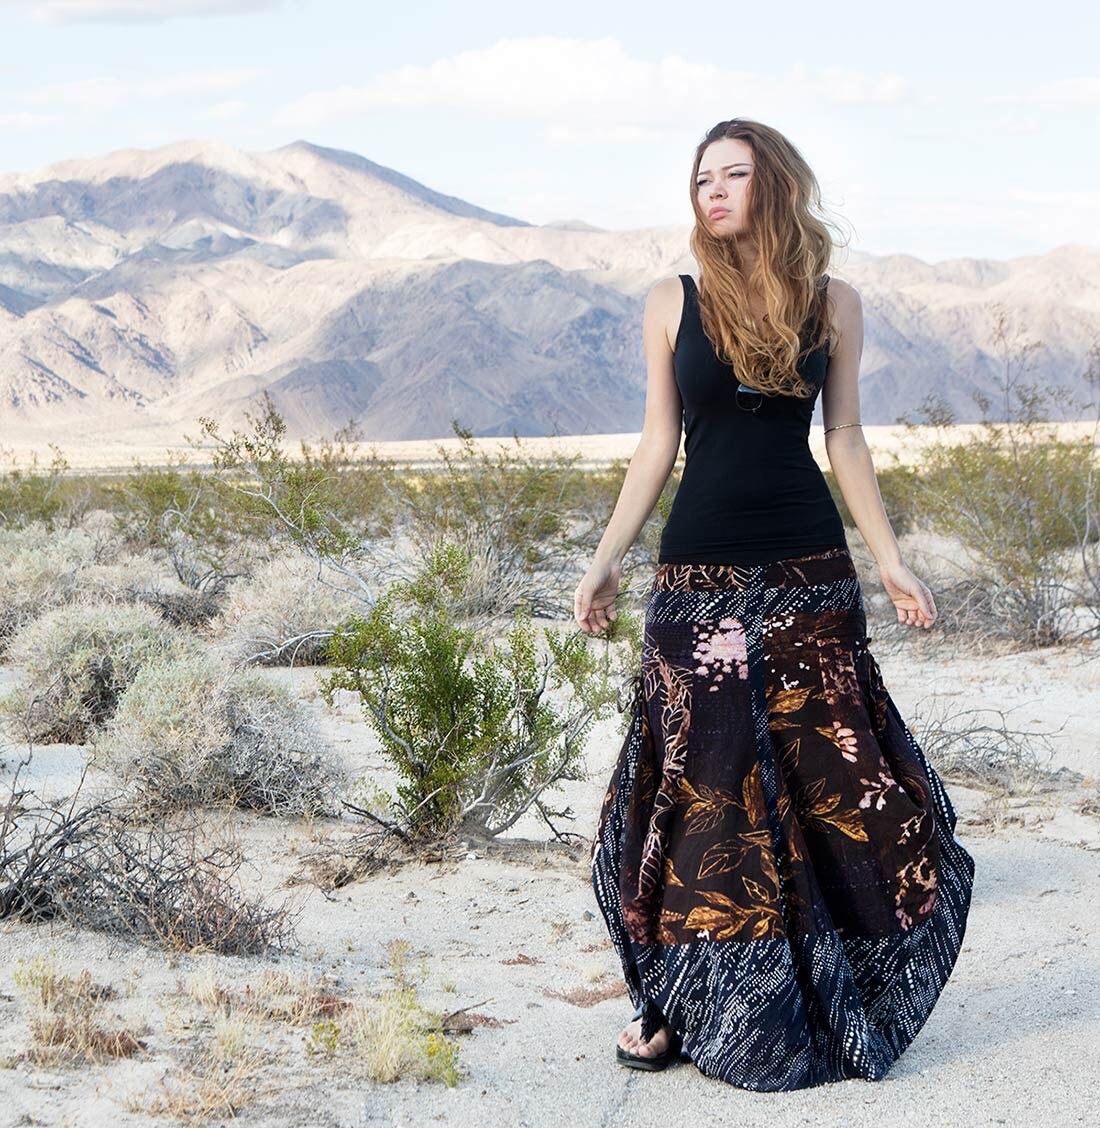 Long Black Wrap Skirt Summer Festival Goddess Hippie Clothes For Women Boho Maxi Gypsy Adjustable Skirt With Unique Oriental and Tribal Pattern 